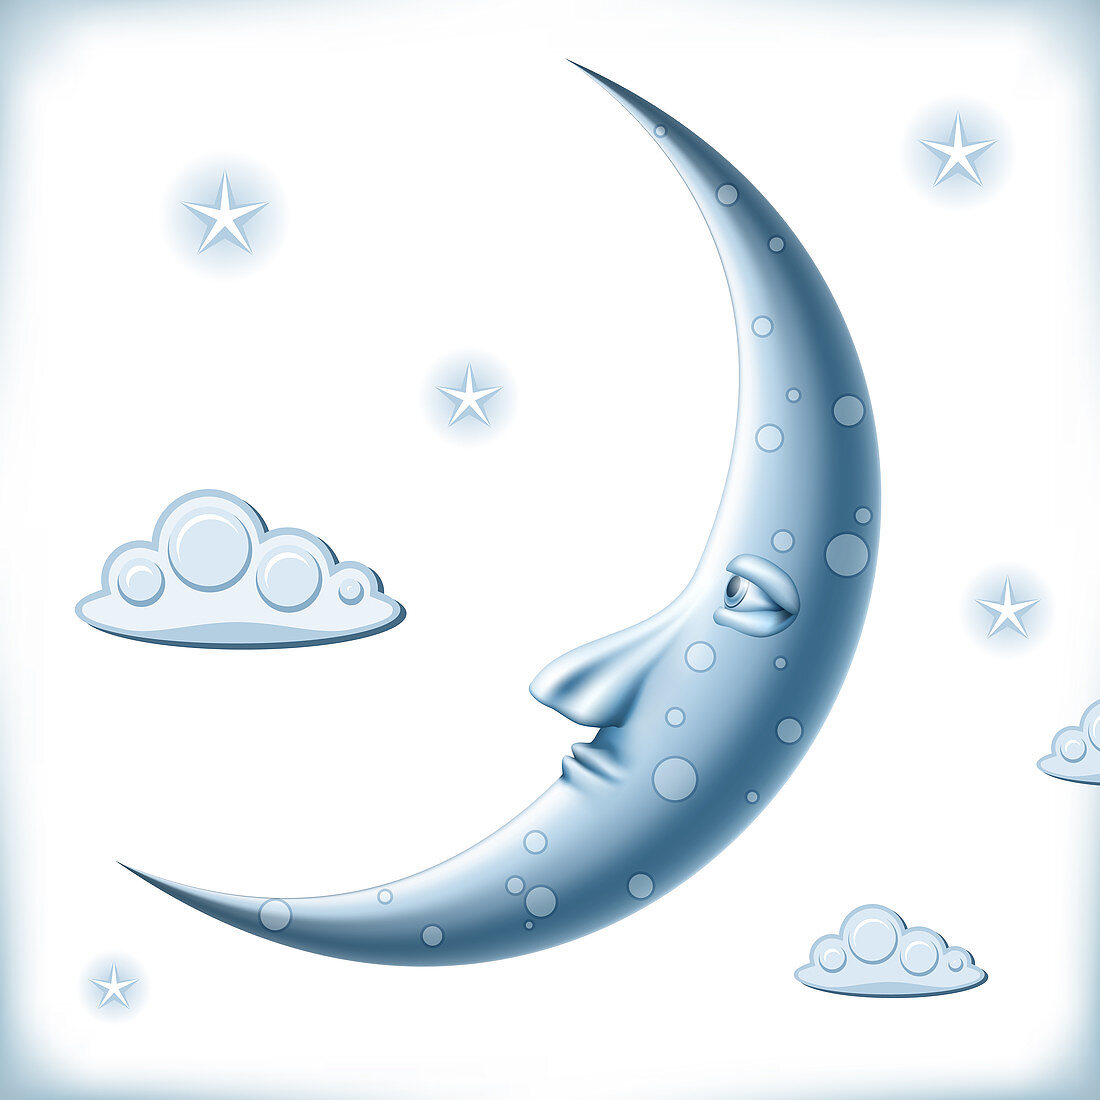 Moon with clouds and stars, illustration